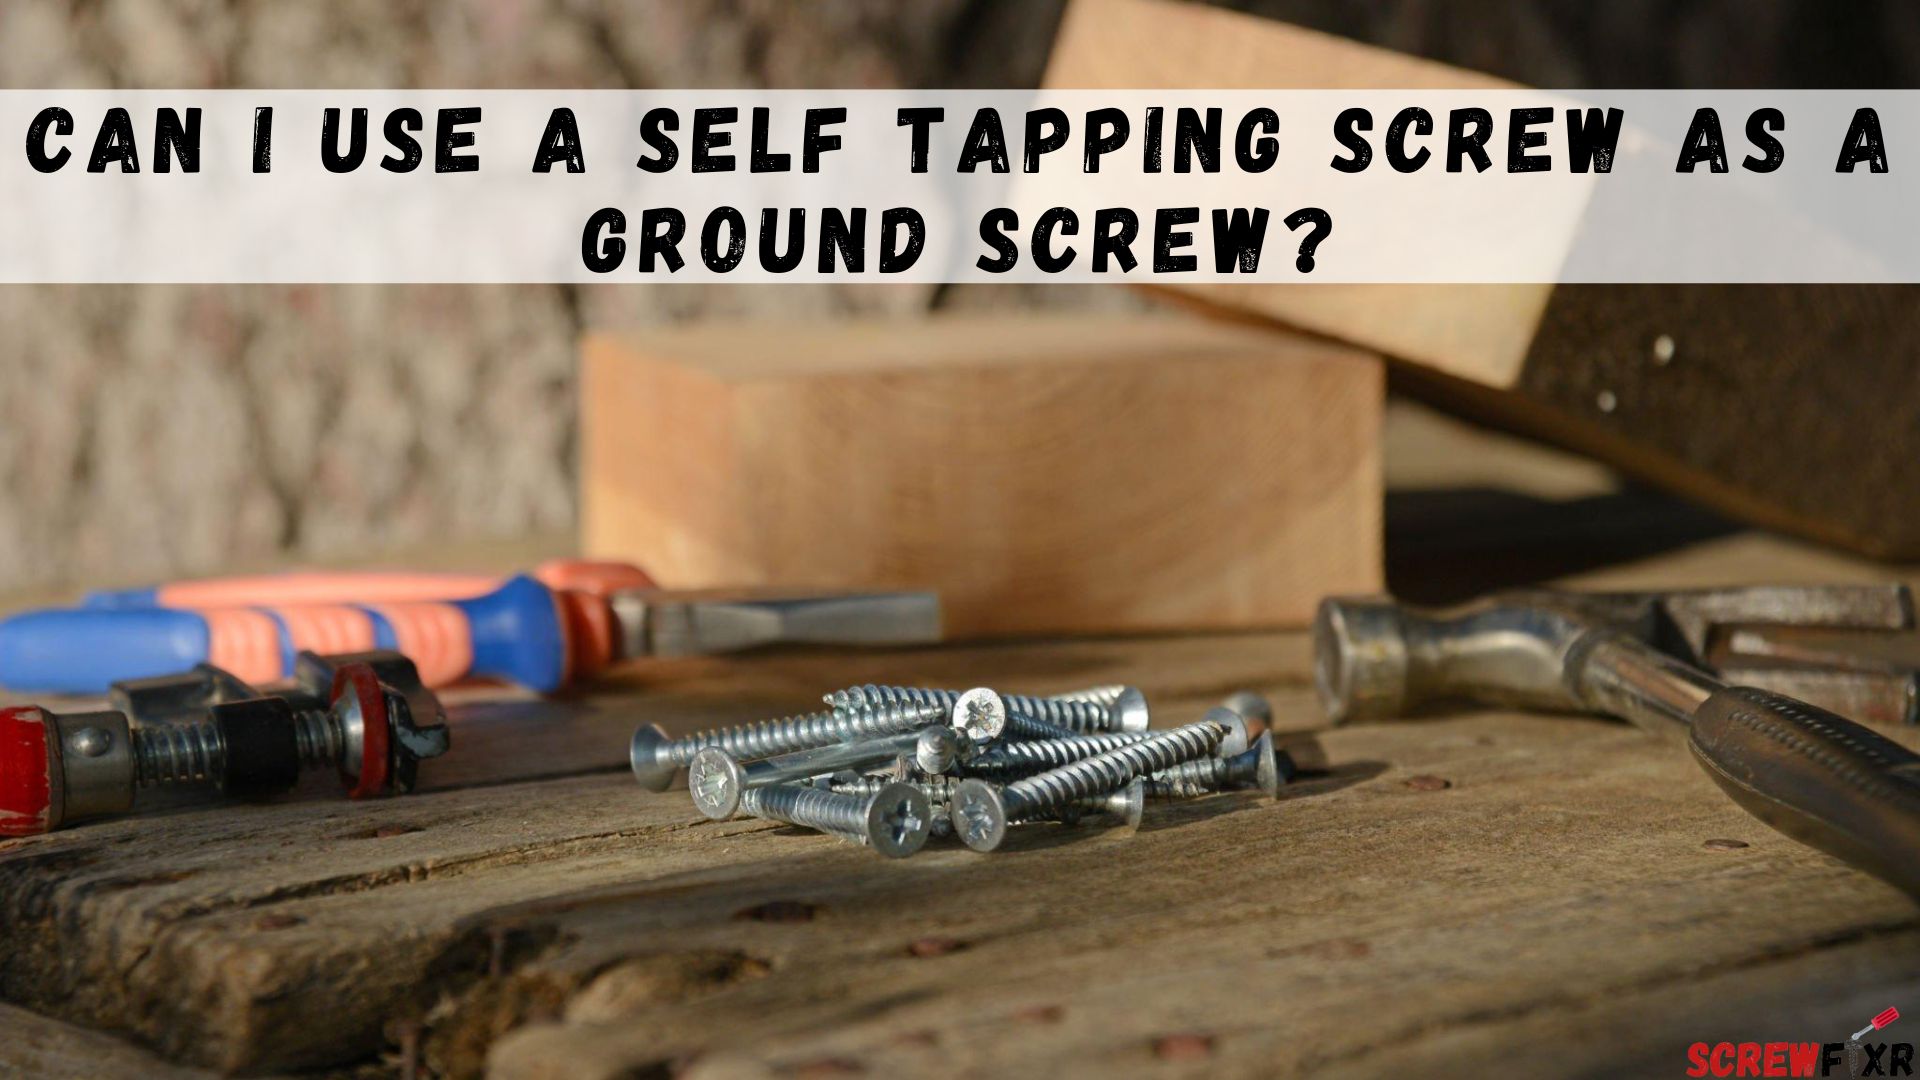 Can I Use a Self Tapping Screw as a Ground Screw